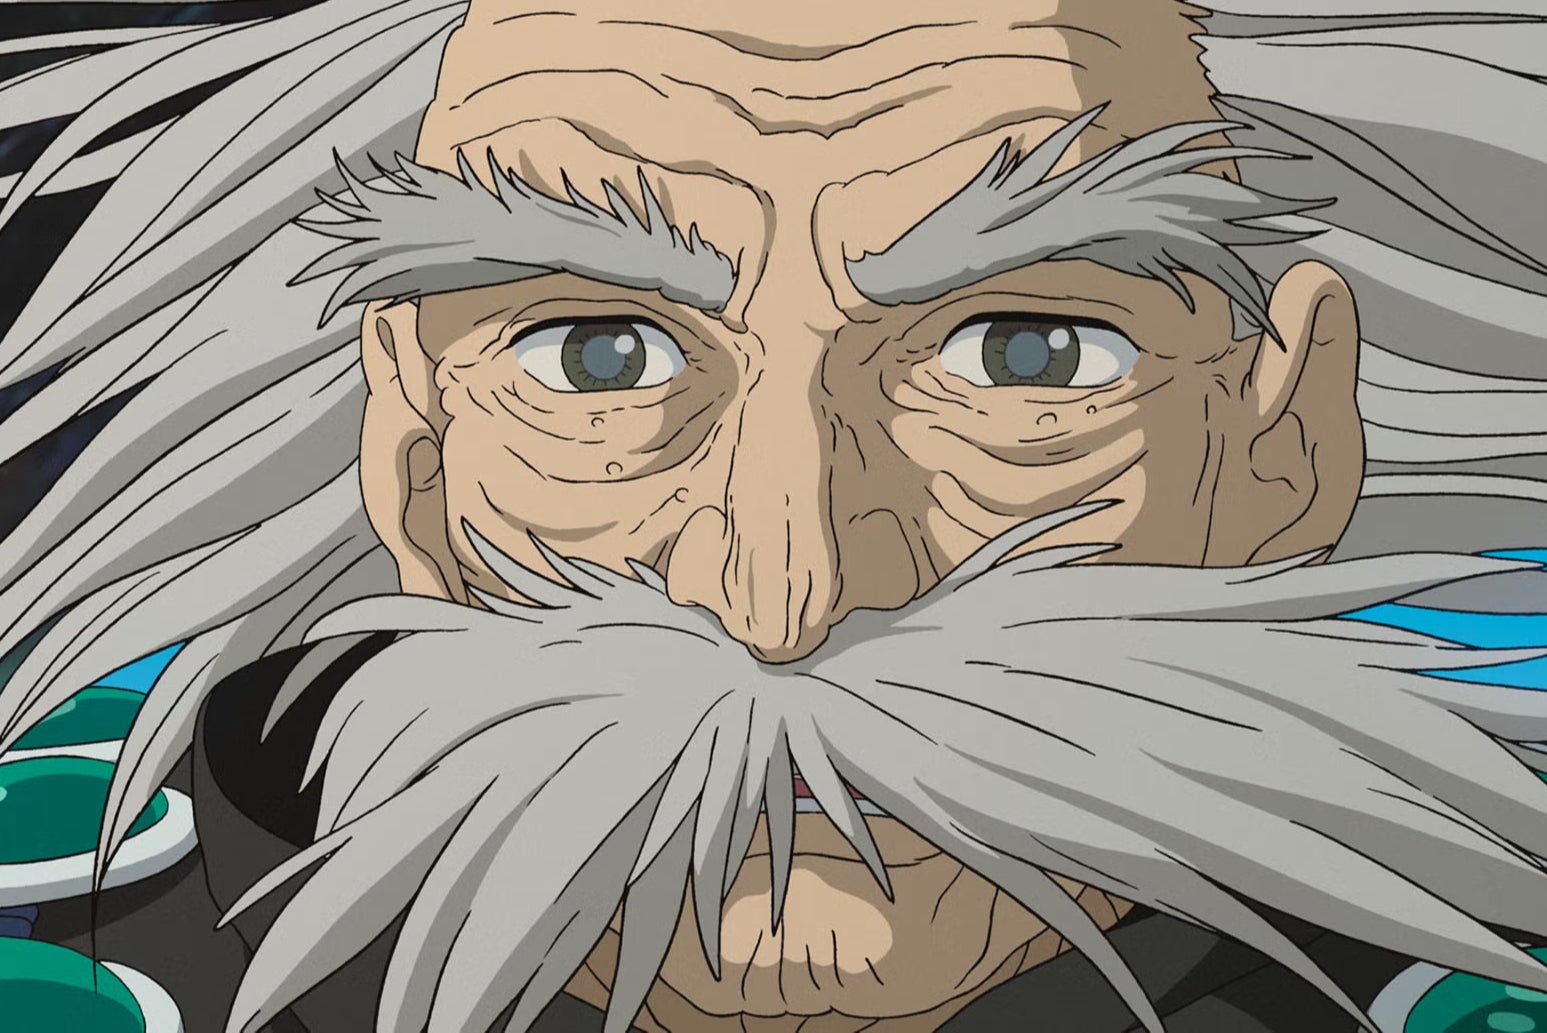 Going grey (and maybe gold): Hayao Miyazaki’s ‘The Boy and the Heron’